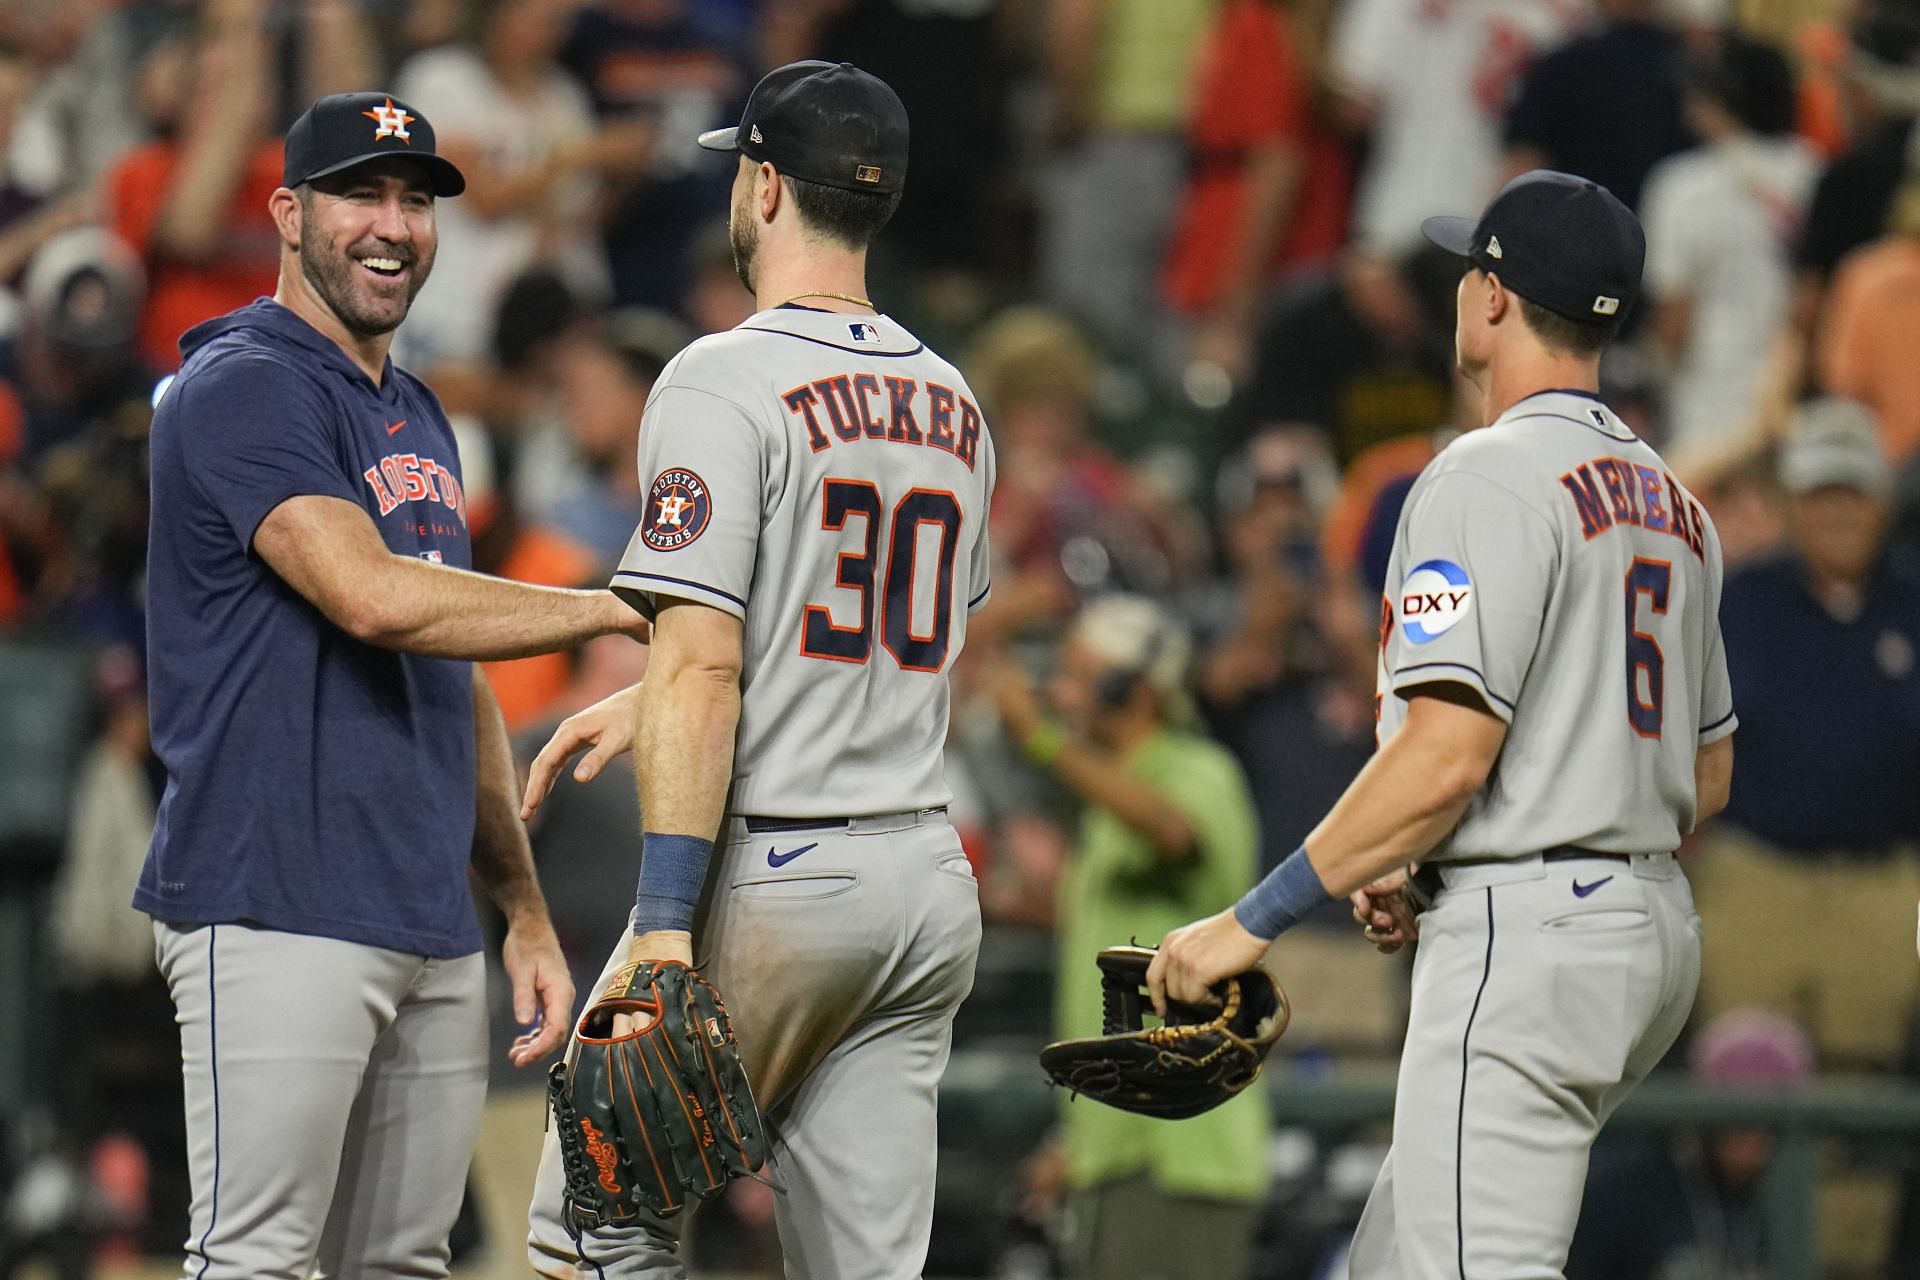 Justin Verlander's wife Kate Upton after Astros clinched their second World  Series title: He is the most positive person I've ever met